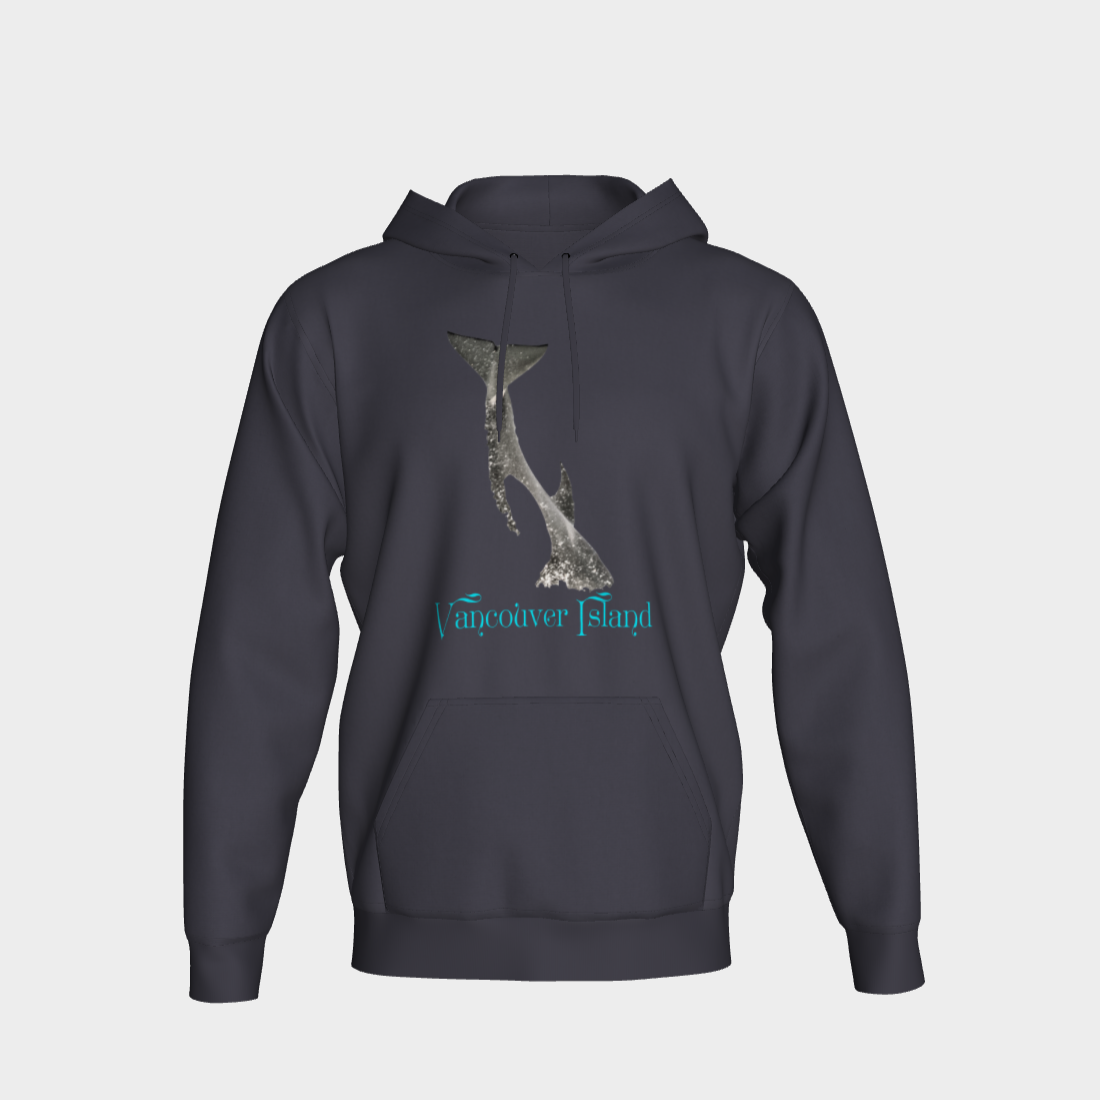 Orca Breach Vancouver Island Unisex Pullover Hoodie Your Van Isle Goddess unisex pullover hoodie is a great classic hoodie!  Created with state of the art tri-tex material which is a non-shrink poly middle encased in two layers of ultra soft cotton face and lining.